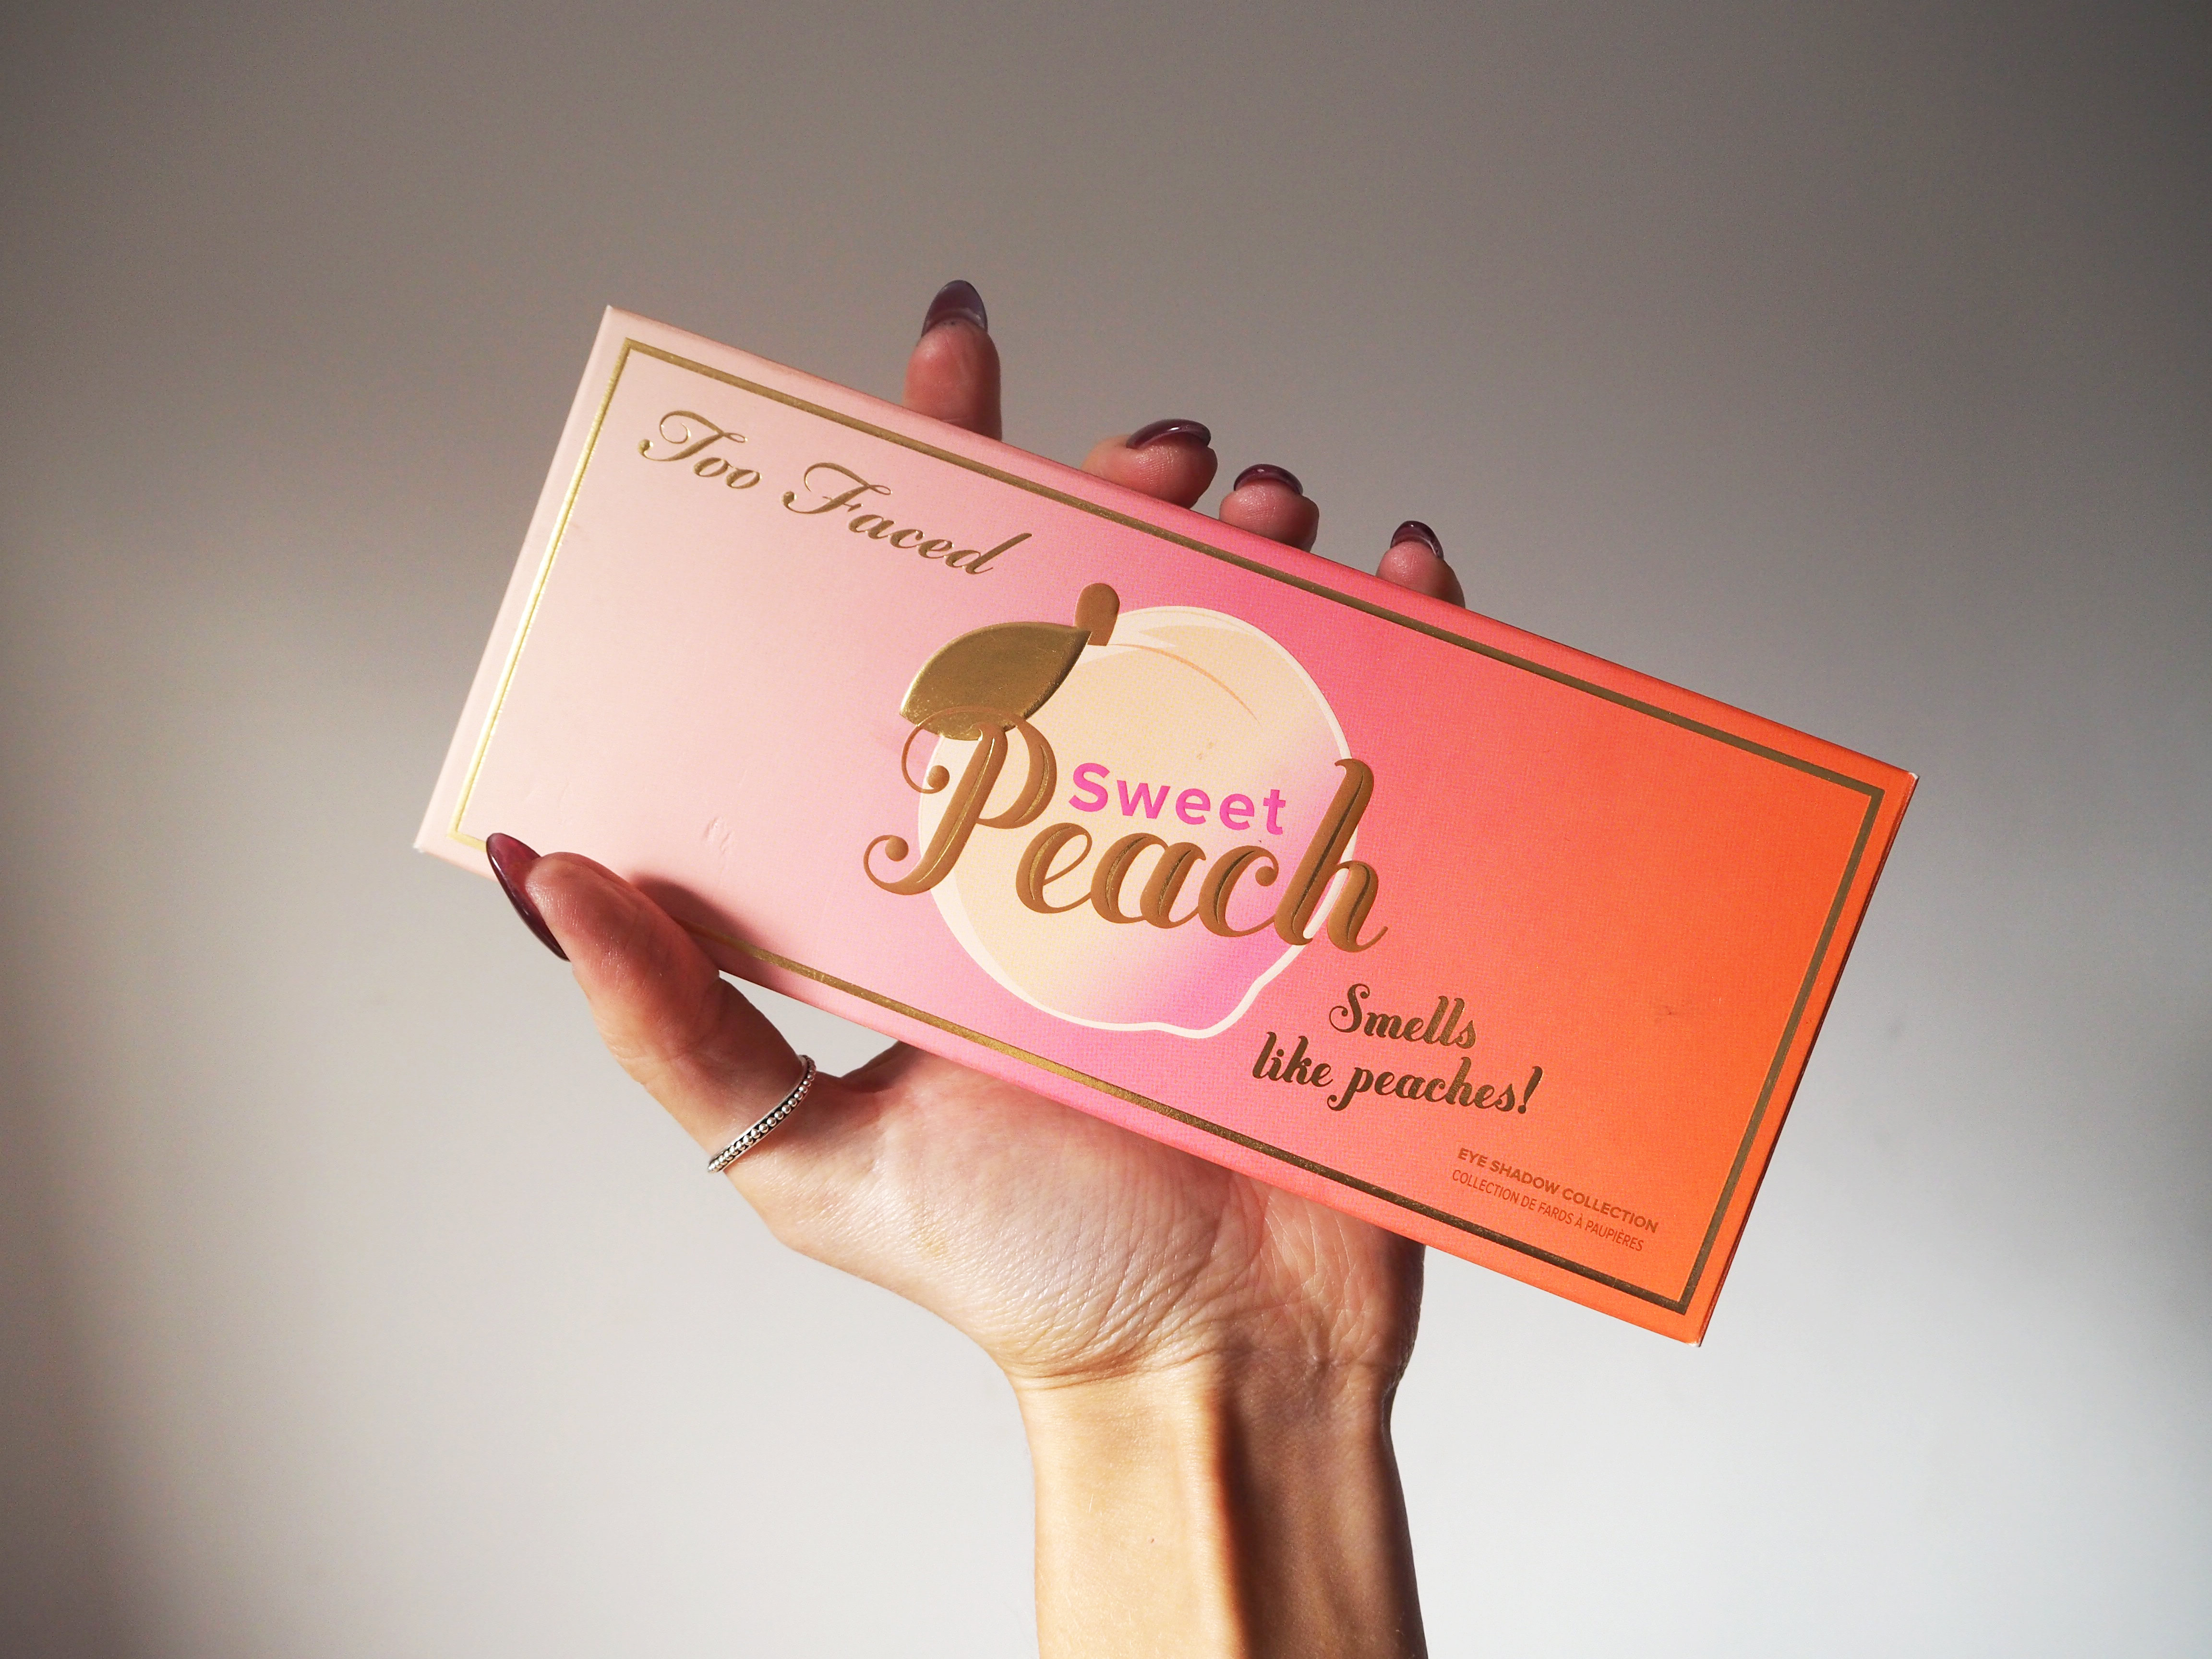 Too Faced Sweet Peach Palette Swatches and Review